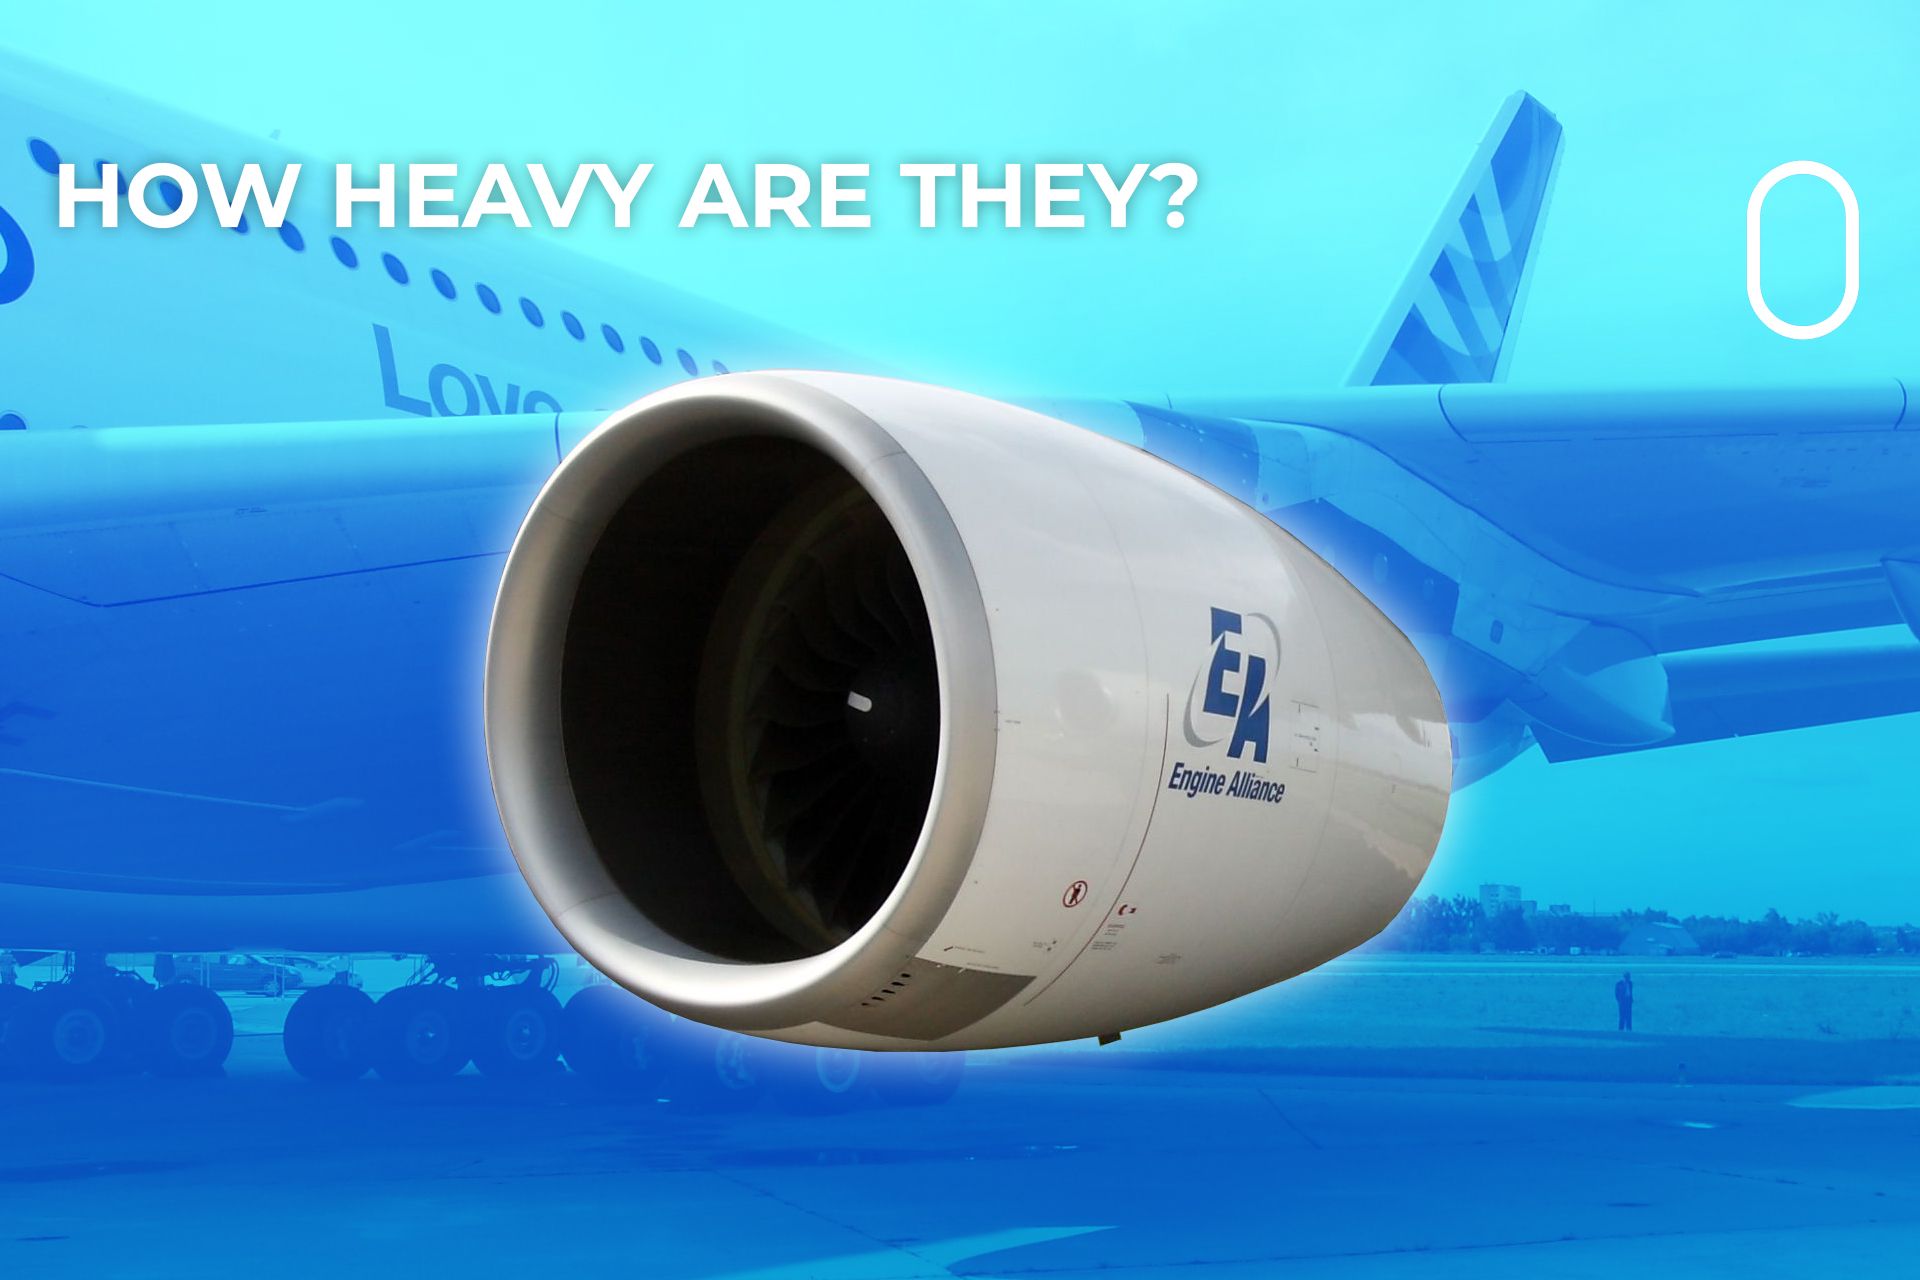 How A lot Do Plane Engines Weigh?